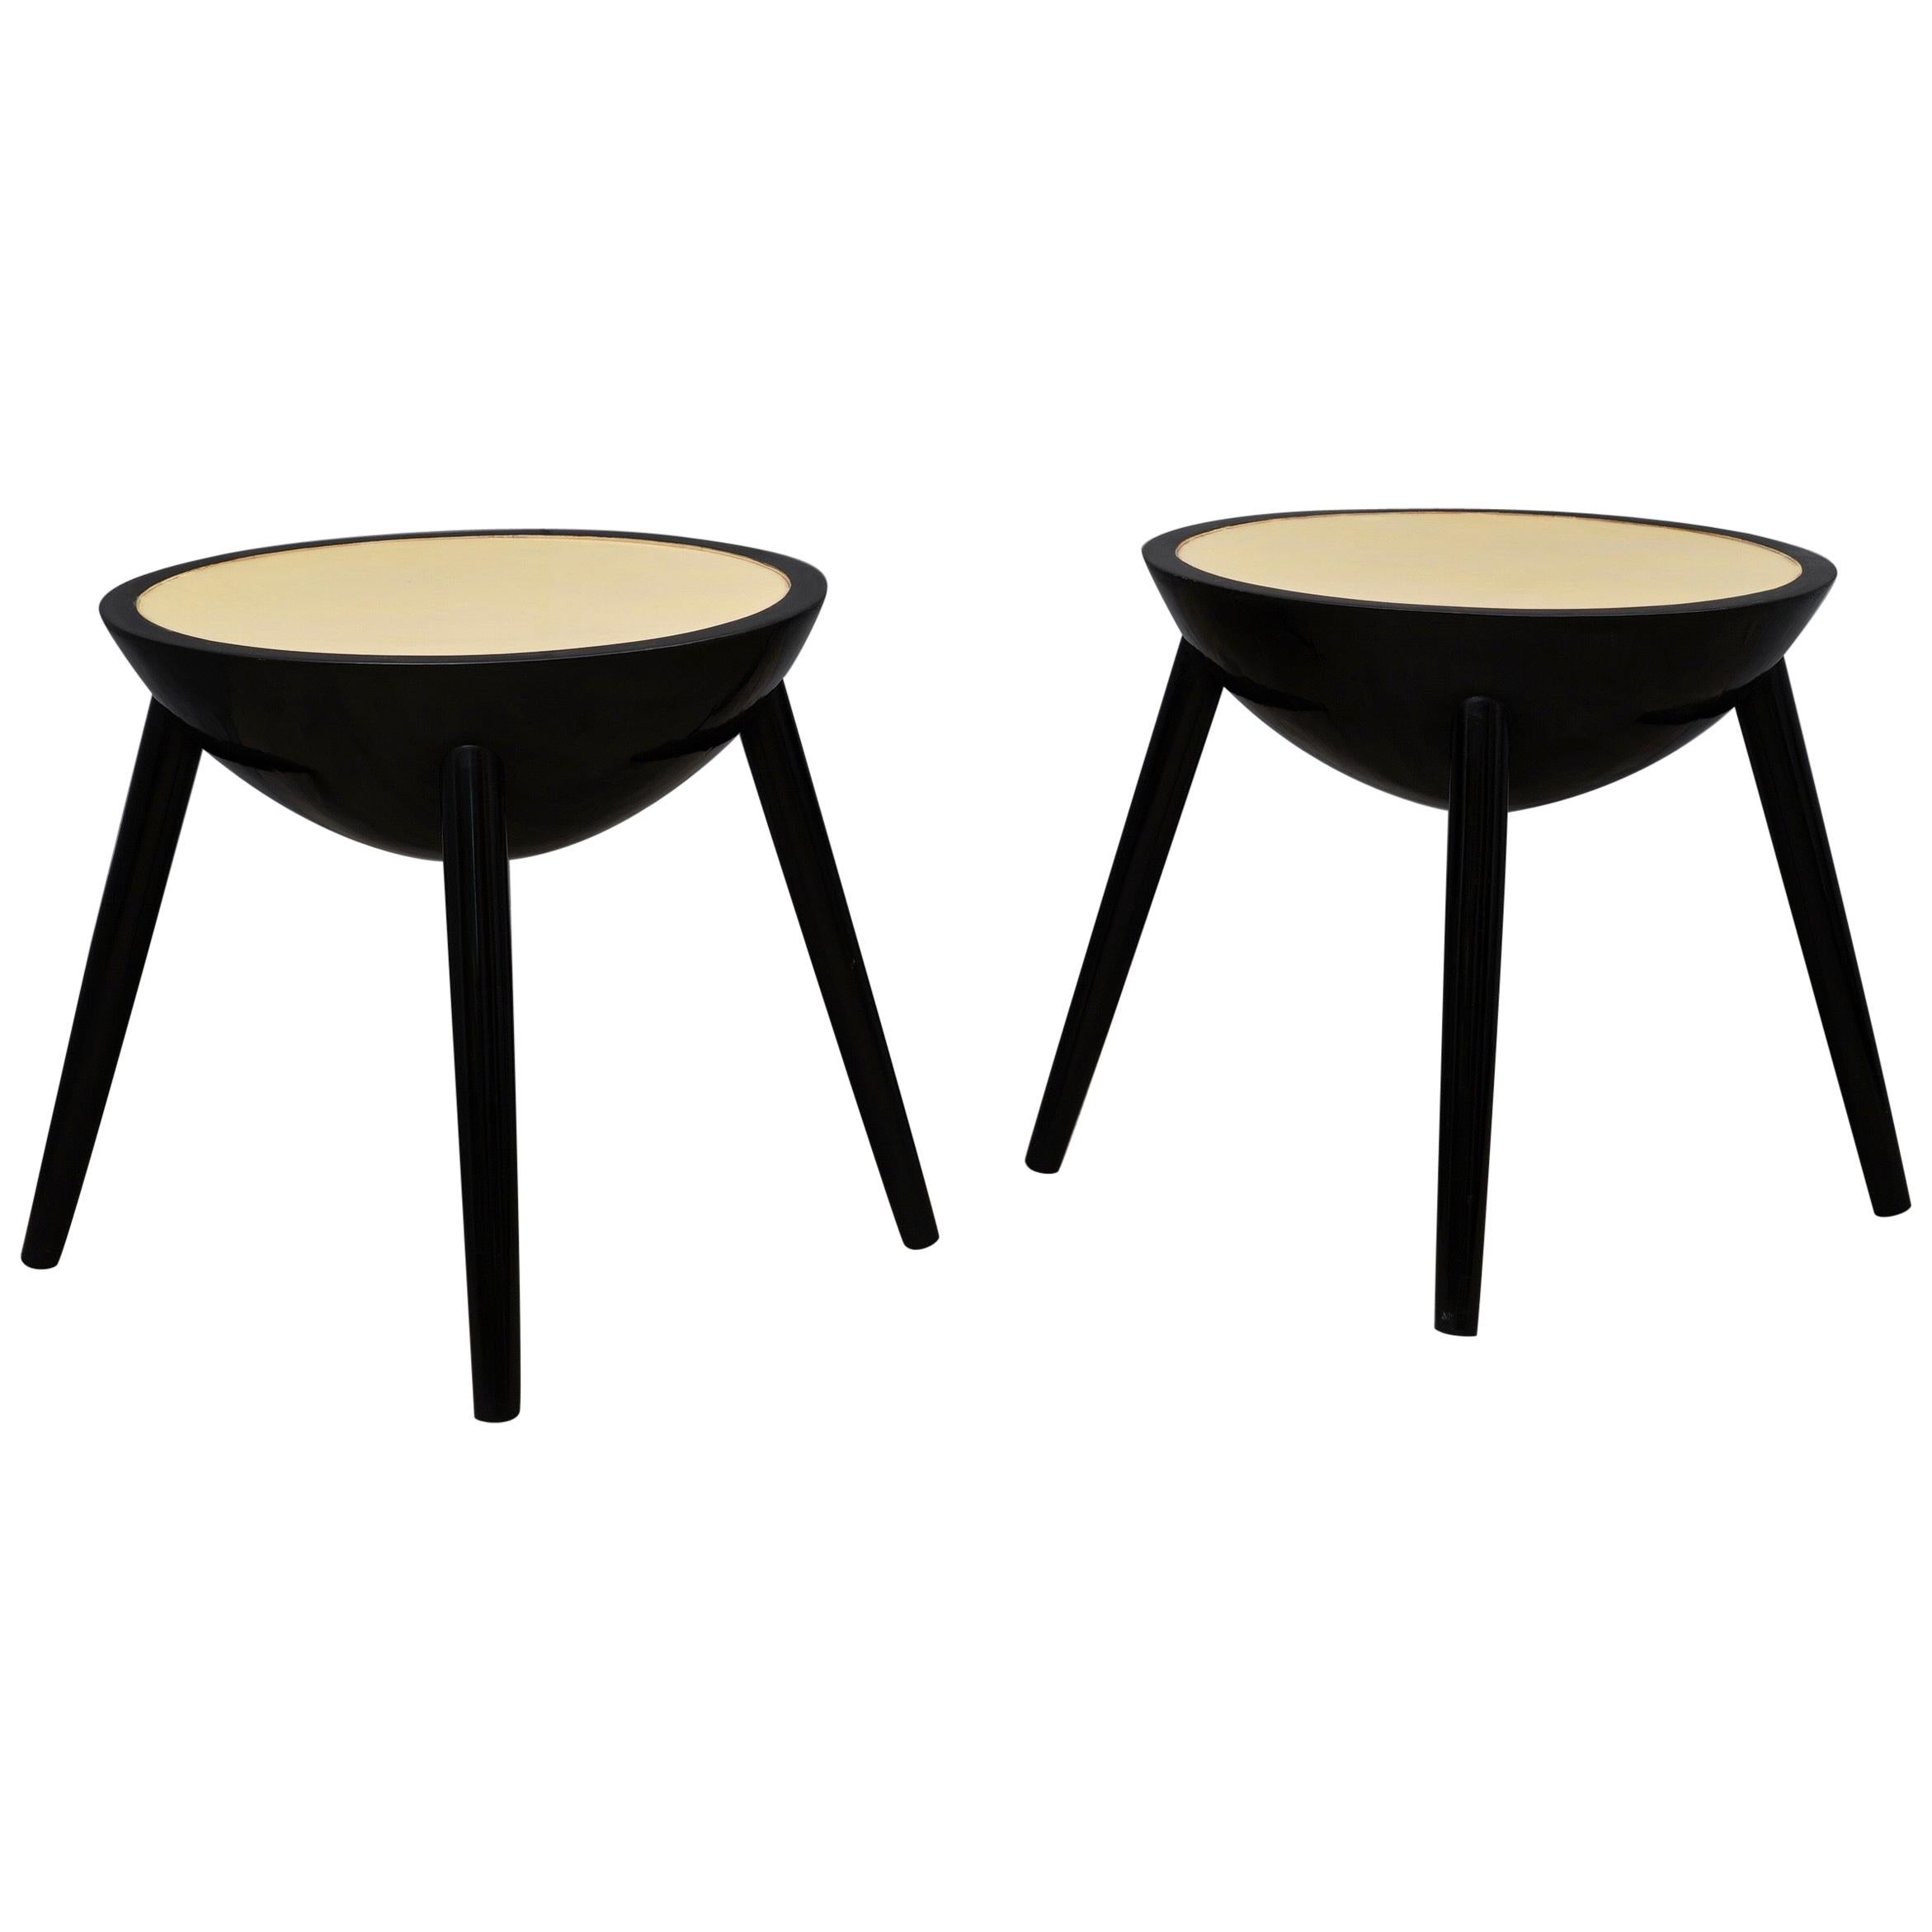 Pair of Round Black and Goat Skin Italian Art Deco Side Tables, 1940